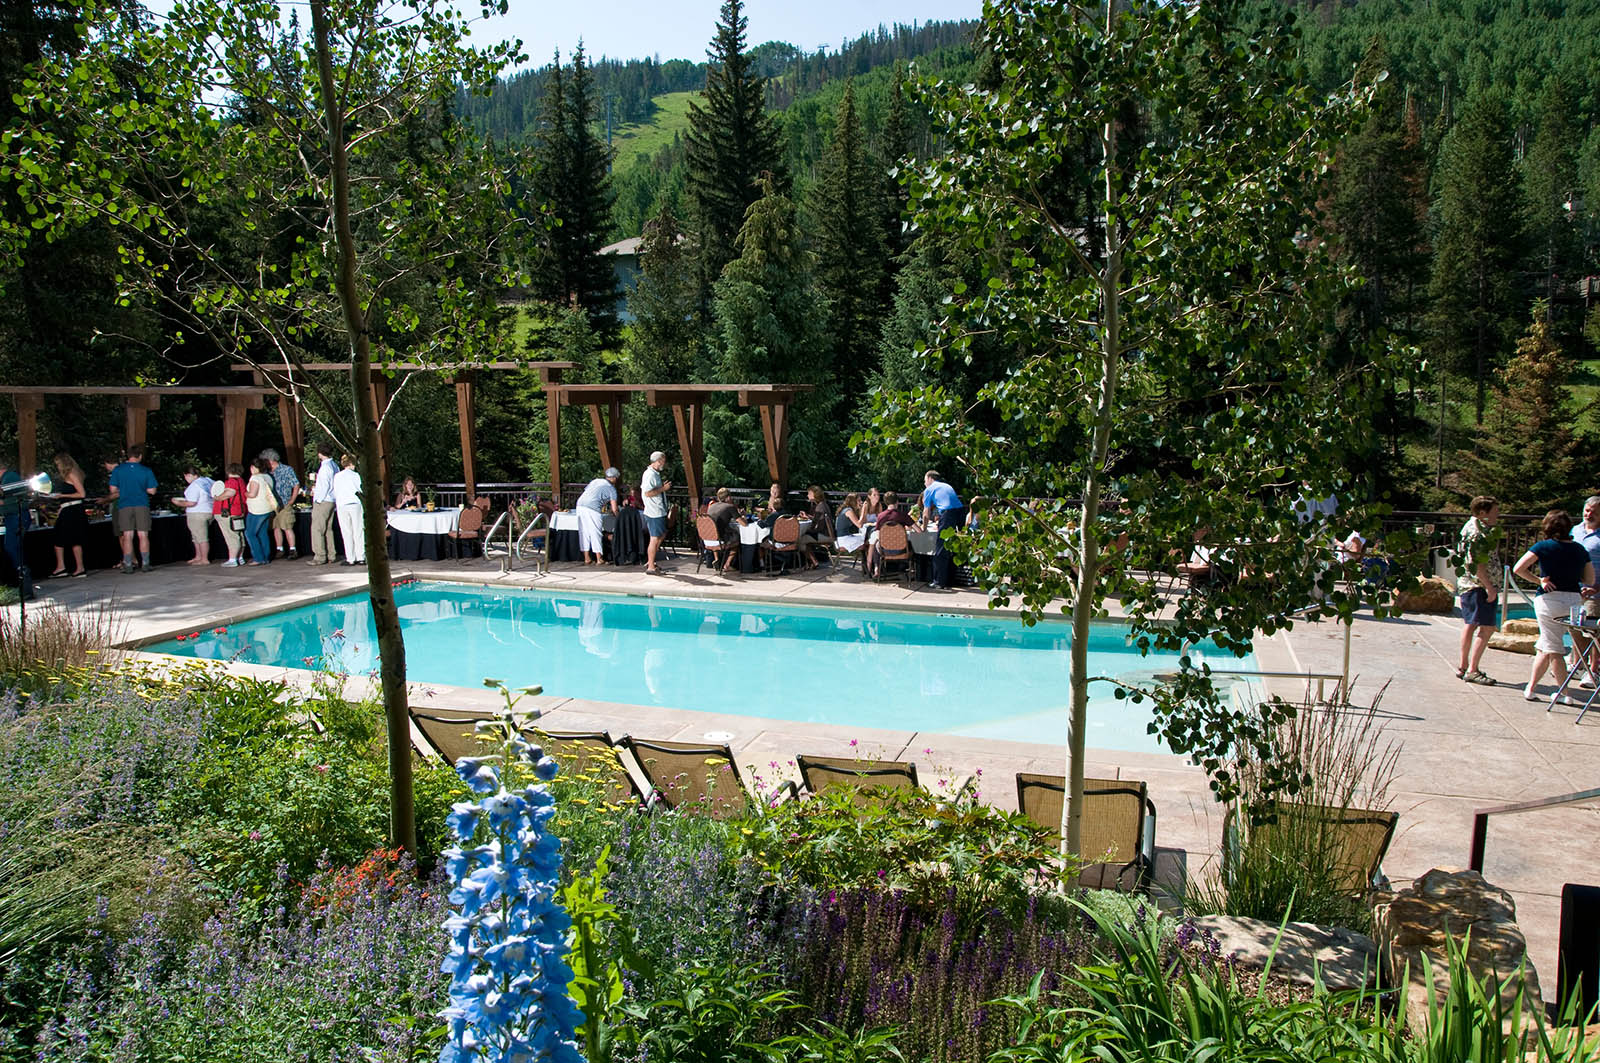 Antlers at Vail conference guests enjoy an outdoor buffet in the Vail hotel’s scenic outdoor pool setting overlooking Gore Creek.